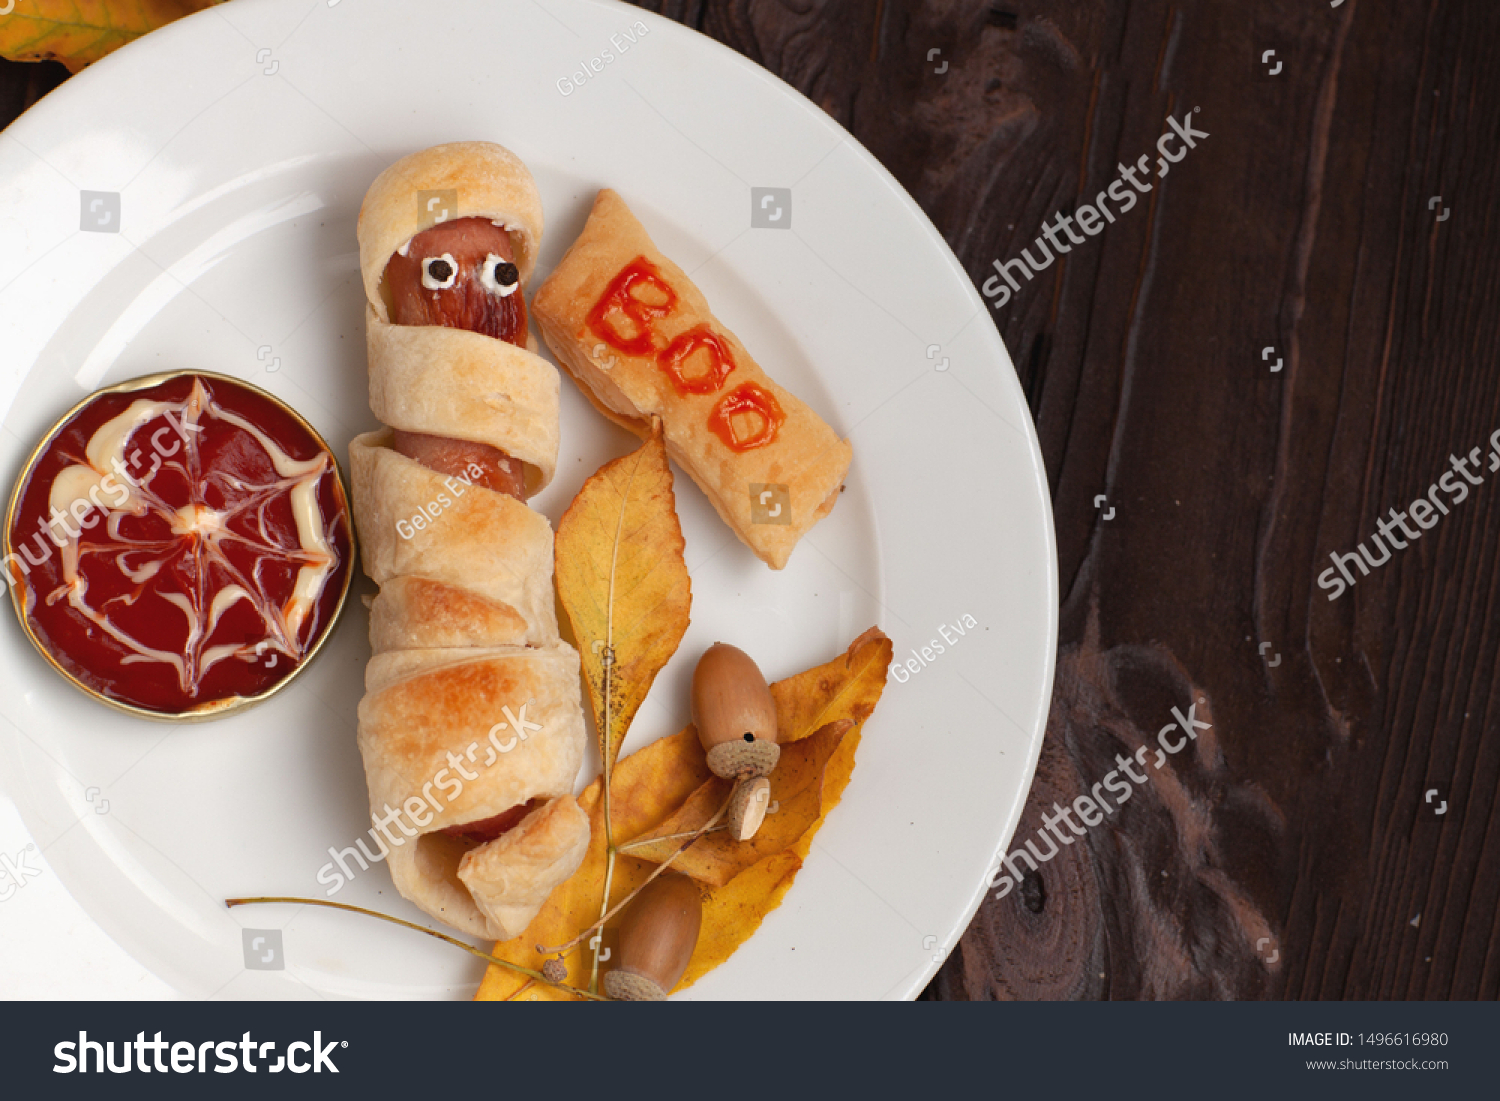 
Mummy sausage in pastry scary Halloween food holiday with eyes on a white plate and vintage wooden brown background #1496616980